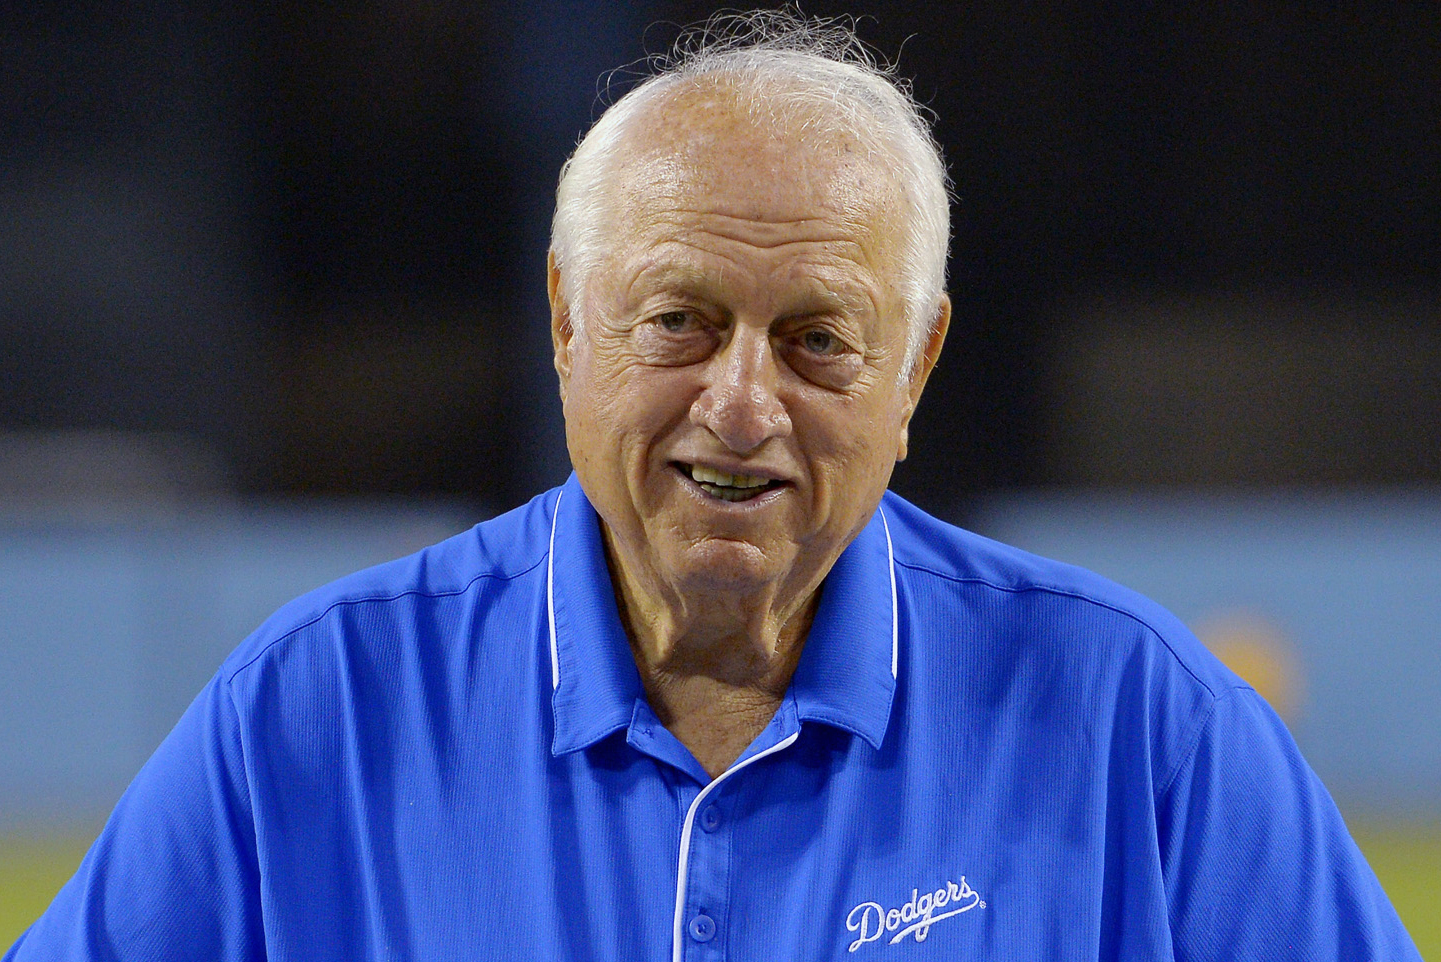 Tommy Lasorda, Hall of Fame manager and LA Dodgers icon, dies aged